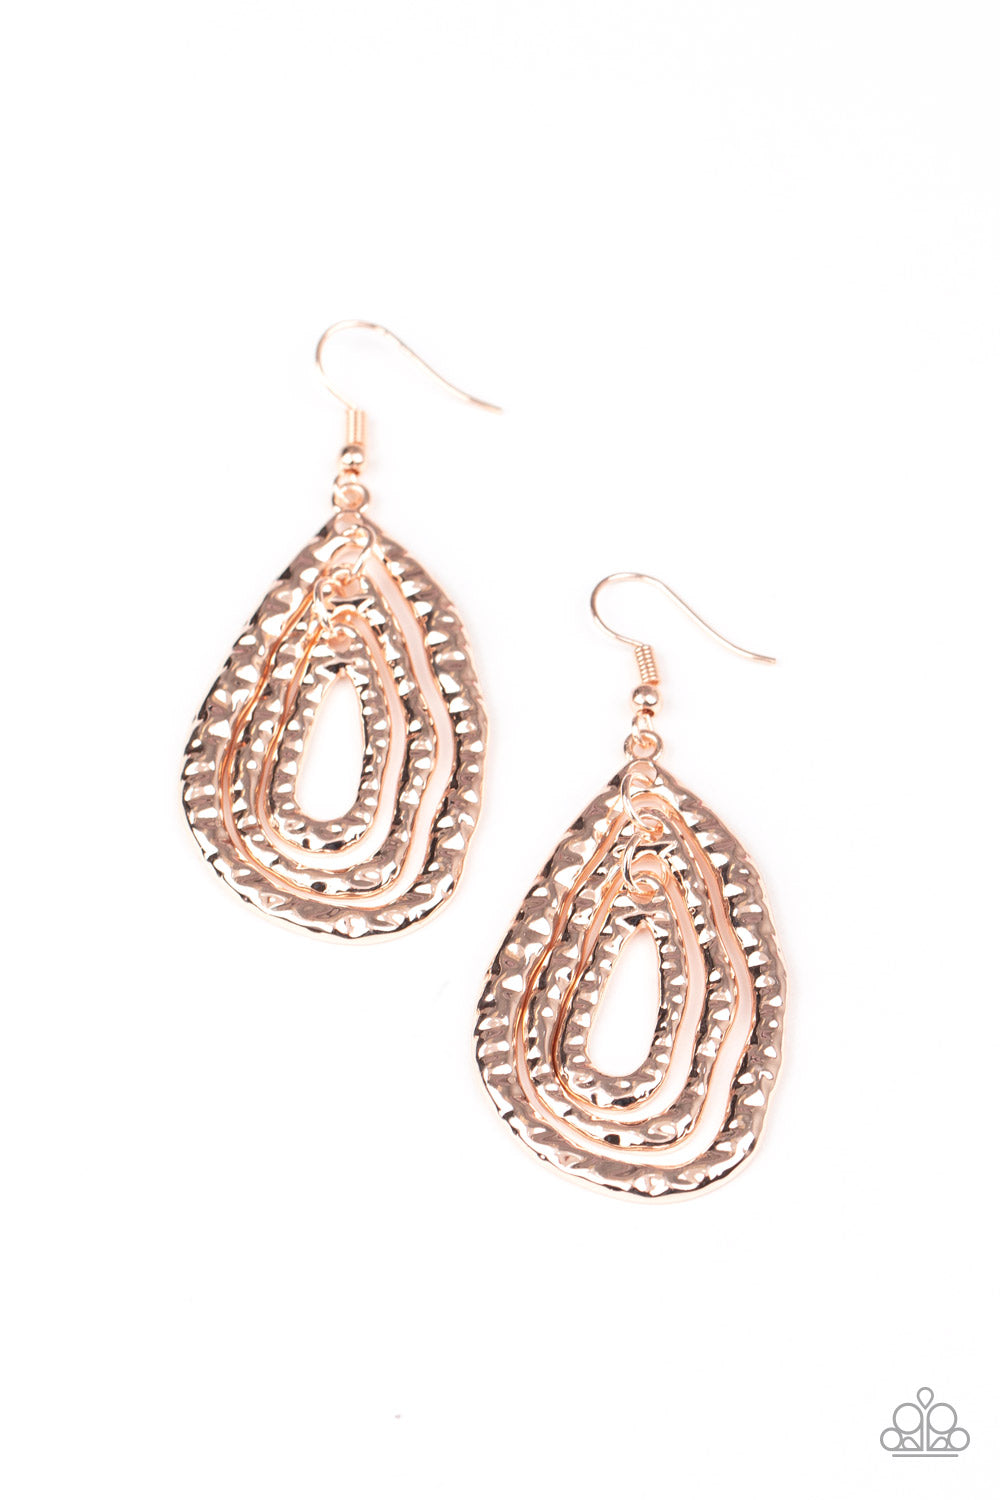 &lt;P&gt;Delicately hammered in shimmery details, a trio of asymmetrical rose gold teardrops link into a shimmering tiered lure. Earring attaches to a standard fishhook fitting.
&lt;/P&gt;  

&lt;P&gt; &lt;I&gt;  Sold as one pair of earrings. &lt;/I&gt;  &lt;/P&gt;


&lt;img src=\&quot;https://d9b54x484lq62.cloudfront.net/paparazzi/shopping/images/517_tag150x115_1.png\&quot; alt=\&quot;New Kit\&quot; align=\&quot;middle\&quot; height=\&quot;50\&quot; width=\&quot;50\&quot;/&gt;